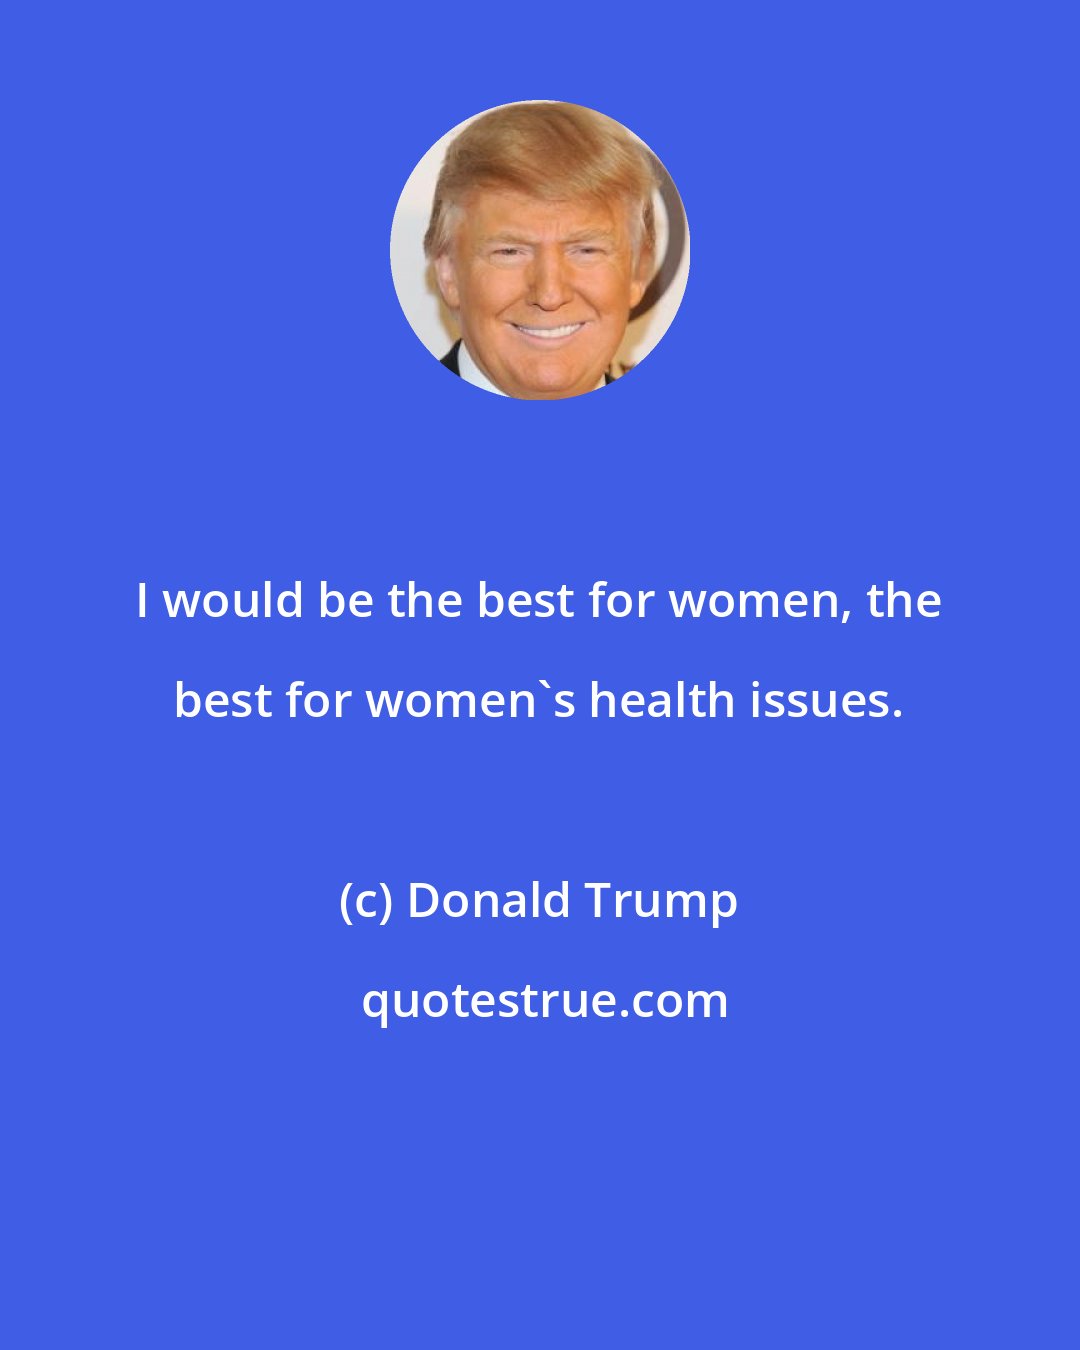 Donald Trump: I would be the best for women, the best for women's health issues.